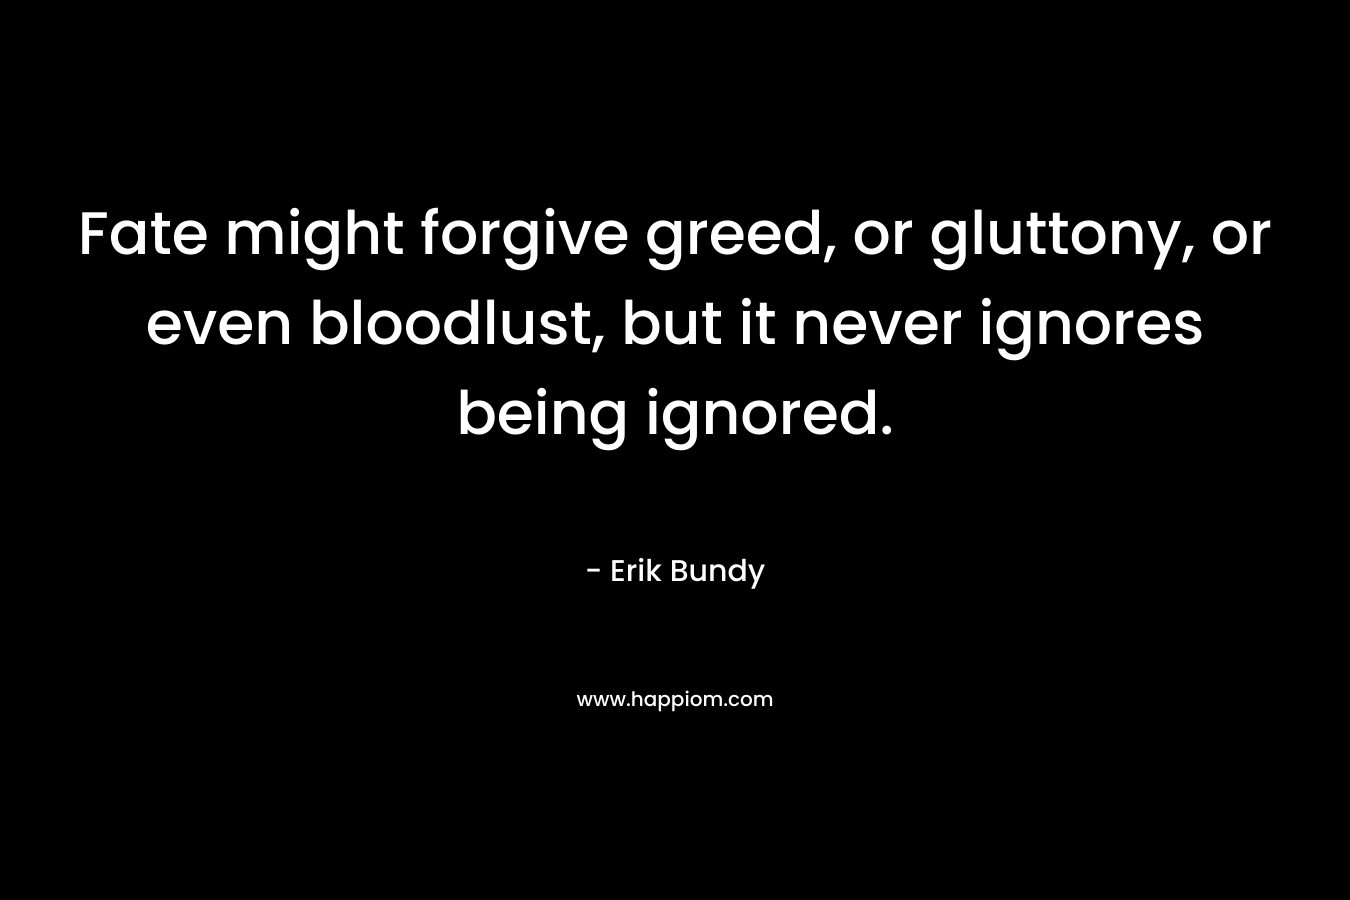 Fate might forgive greed, or gluttony, or even bloodlust, but it never ignores being ignored.